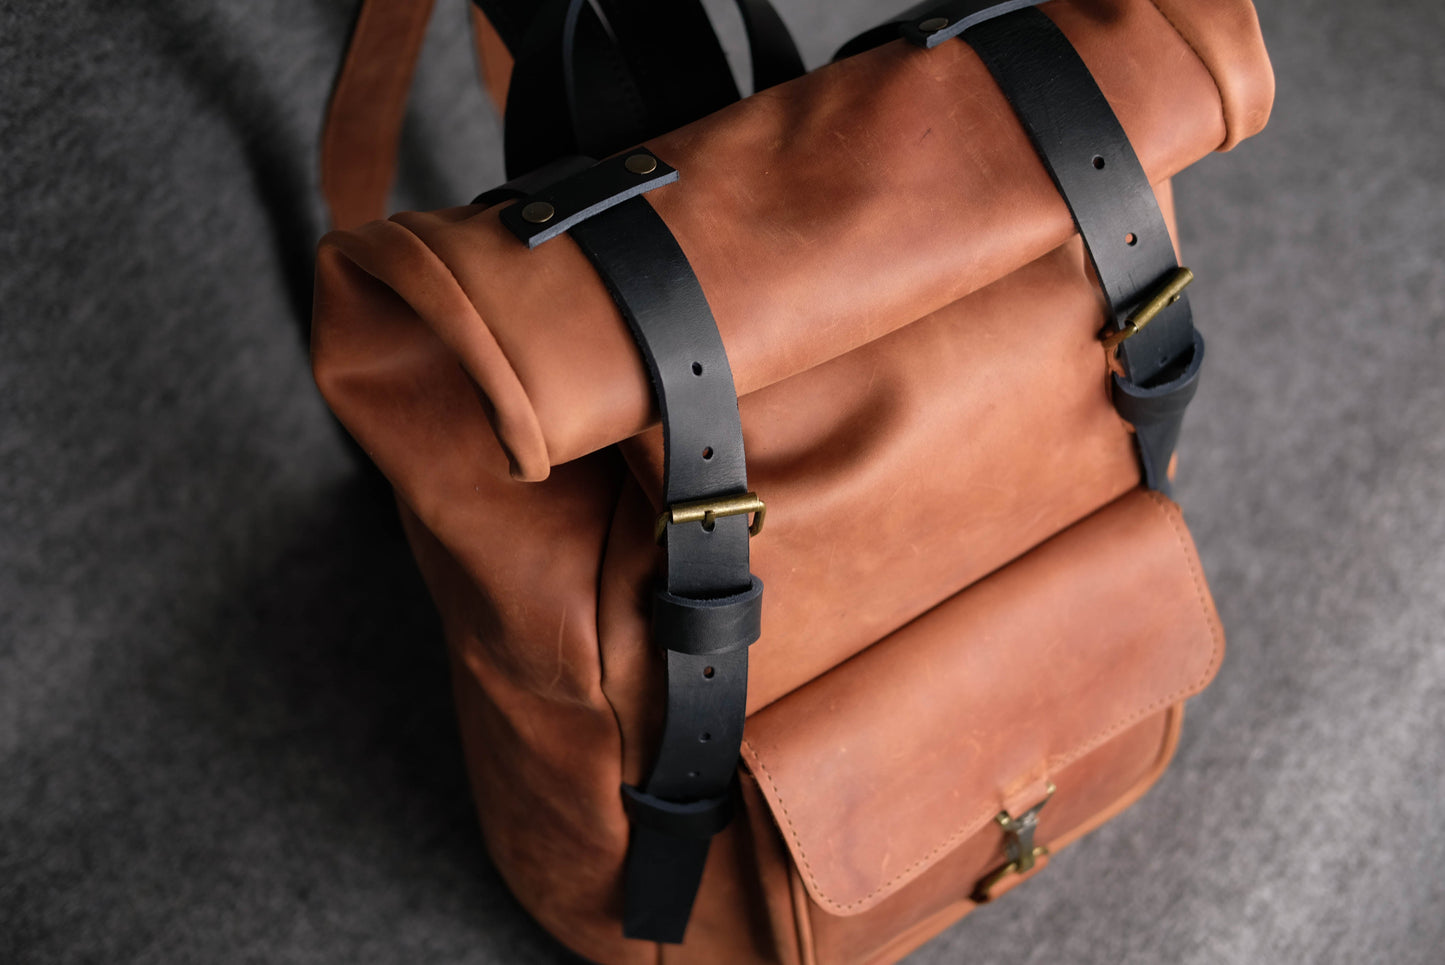 Men Backpack leather Chocolate + Amber "Hankle H42"